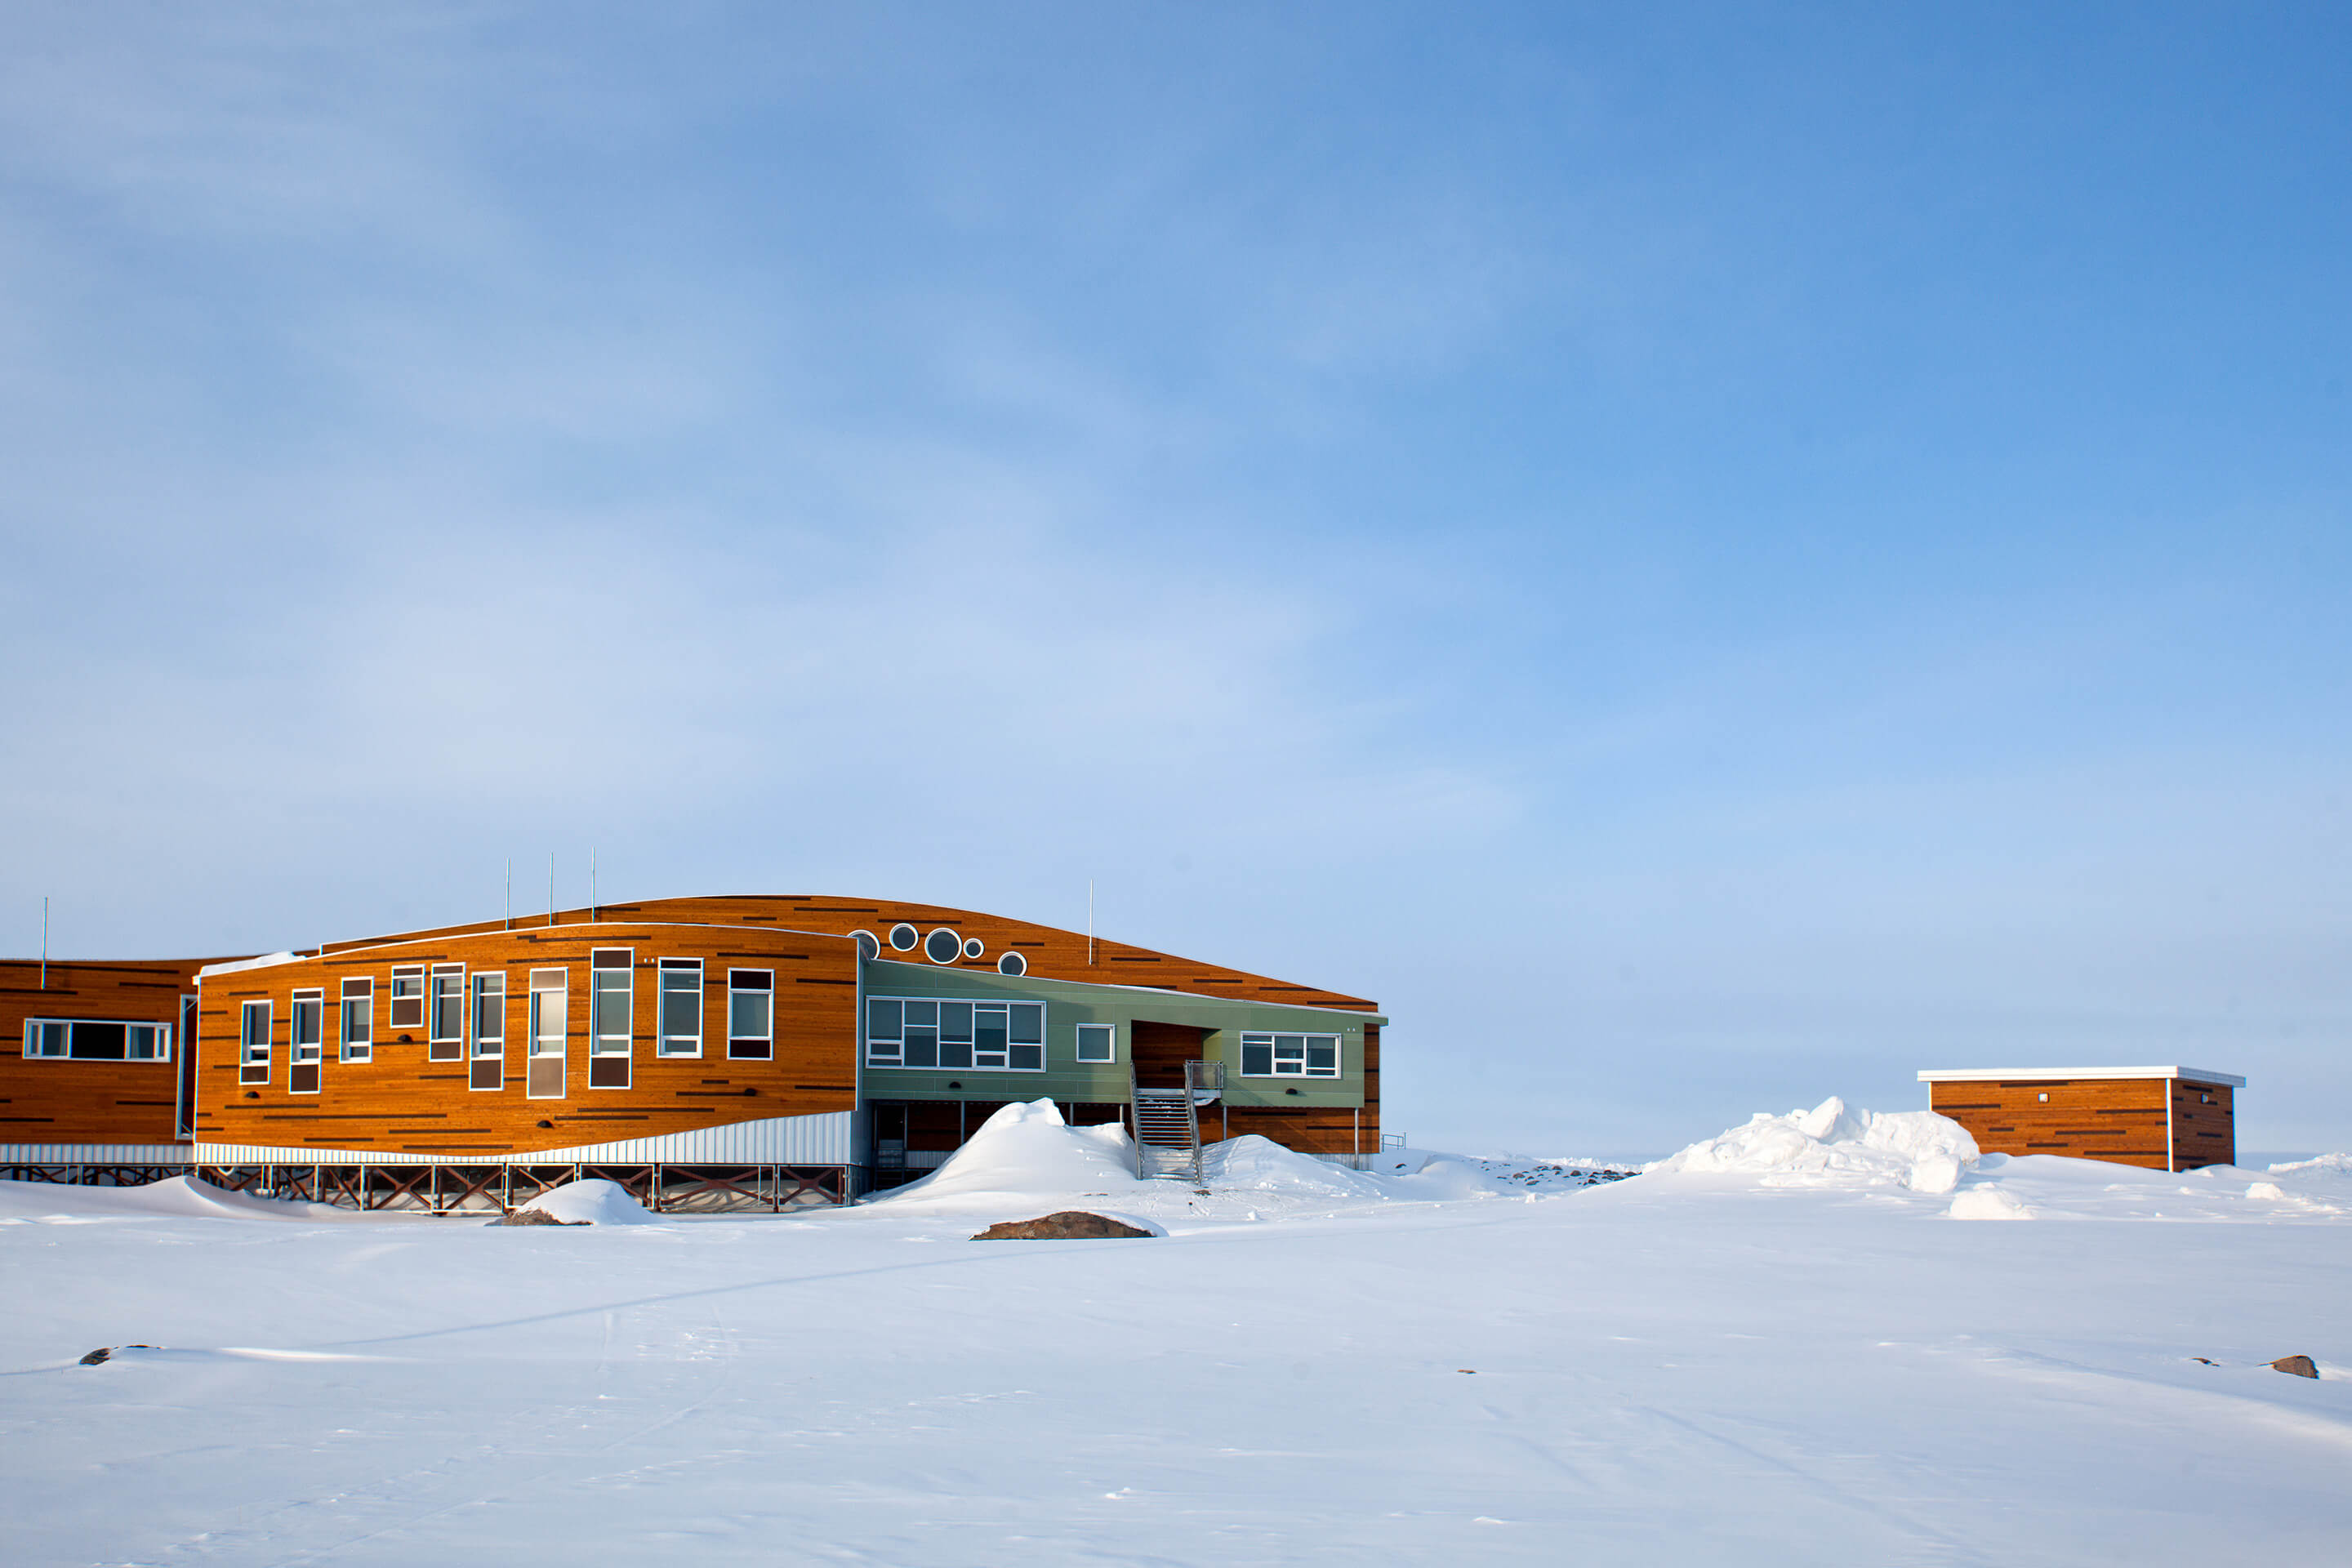 A timber building designed with a swooping massing sitting in the arctic snow